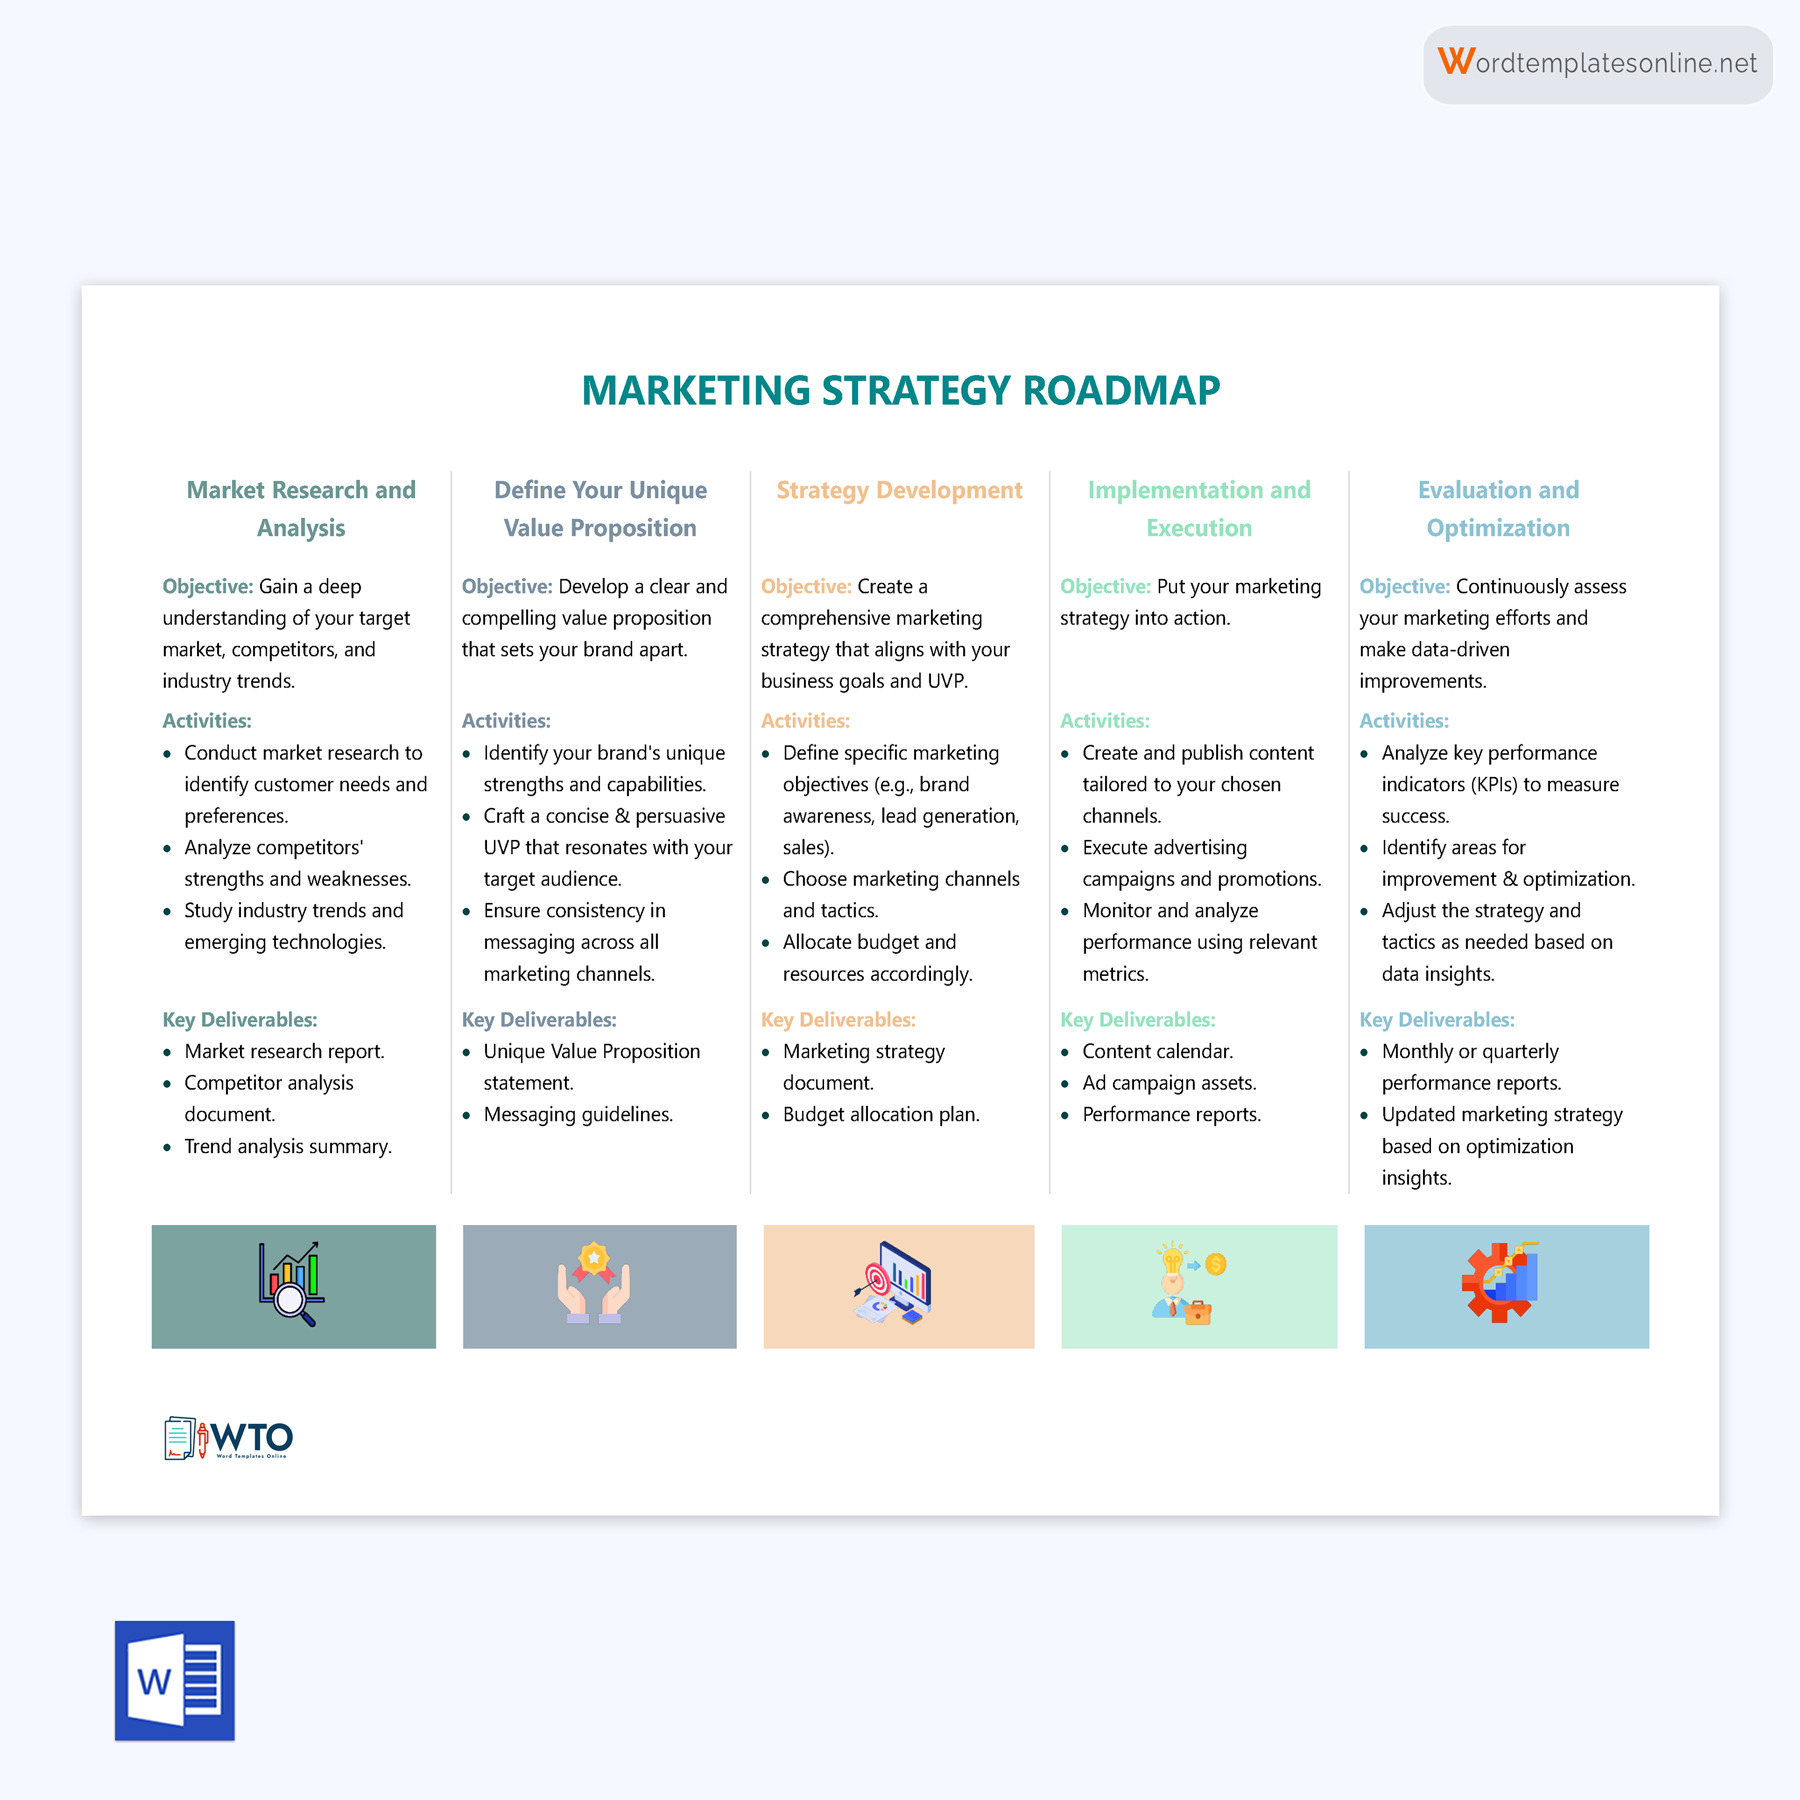 Professional Editable Marketing Strategy Roadmap Template 03 for Word Document